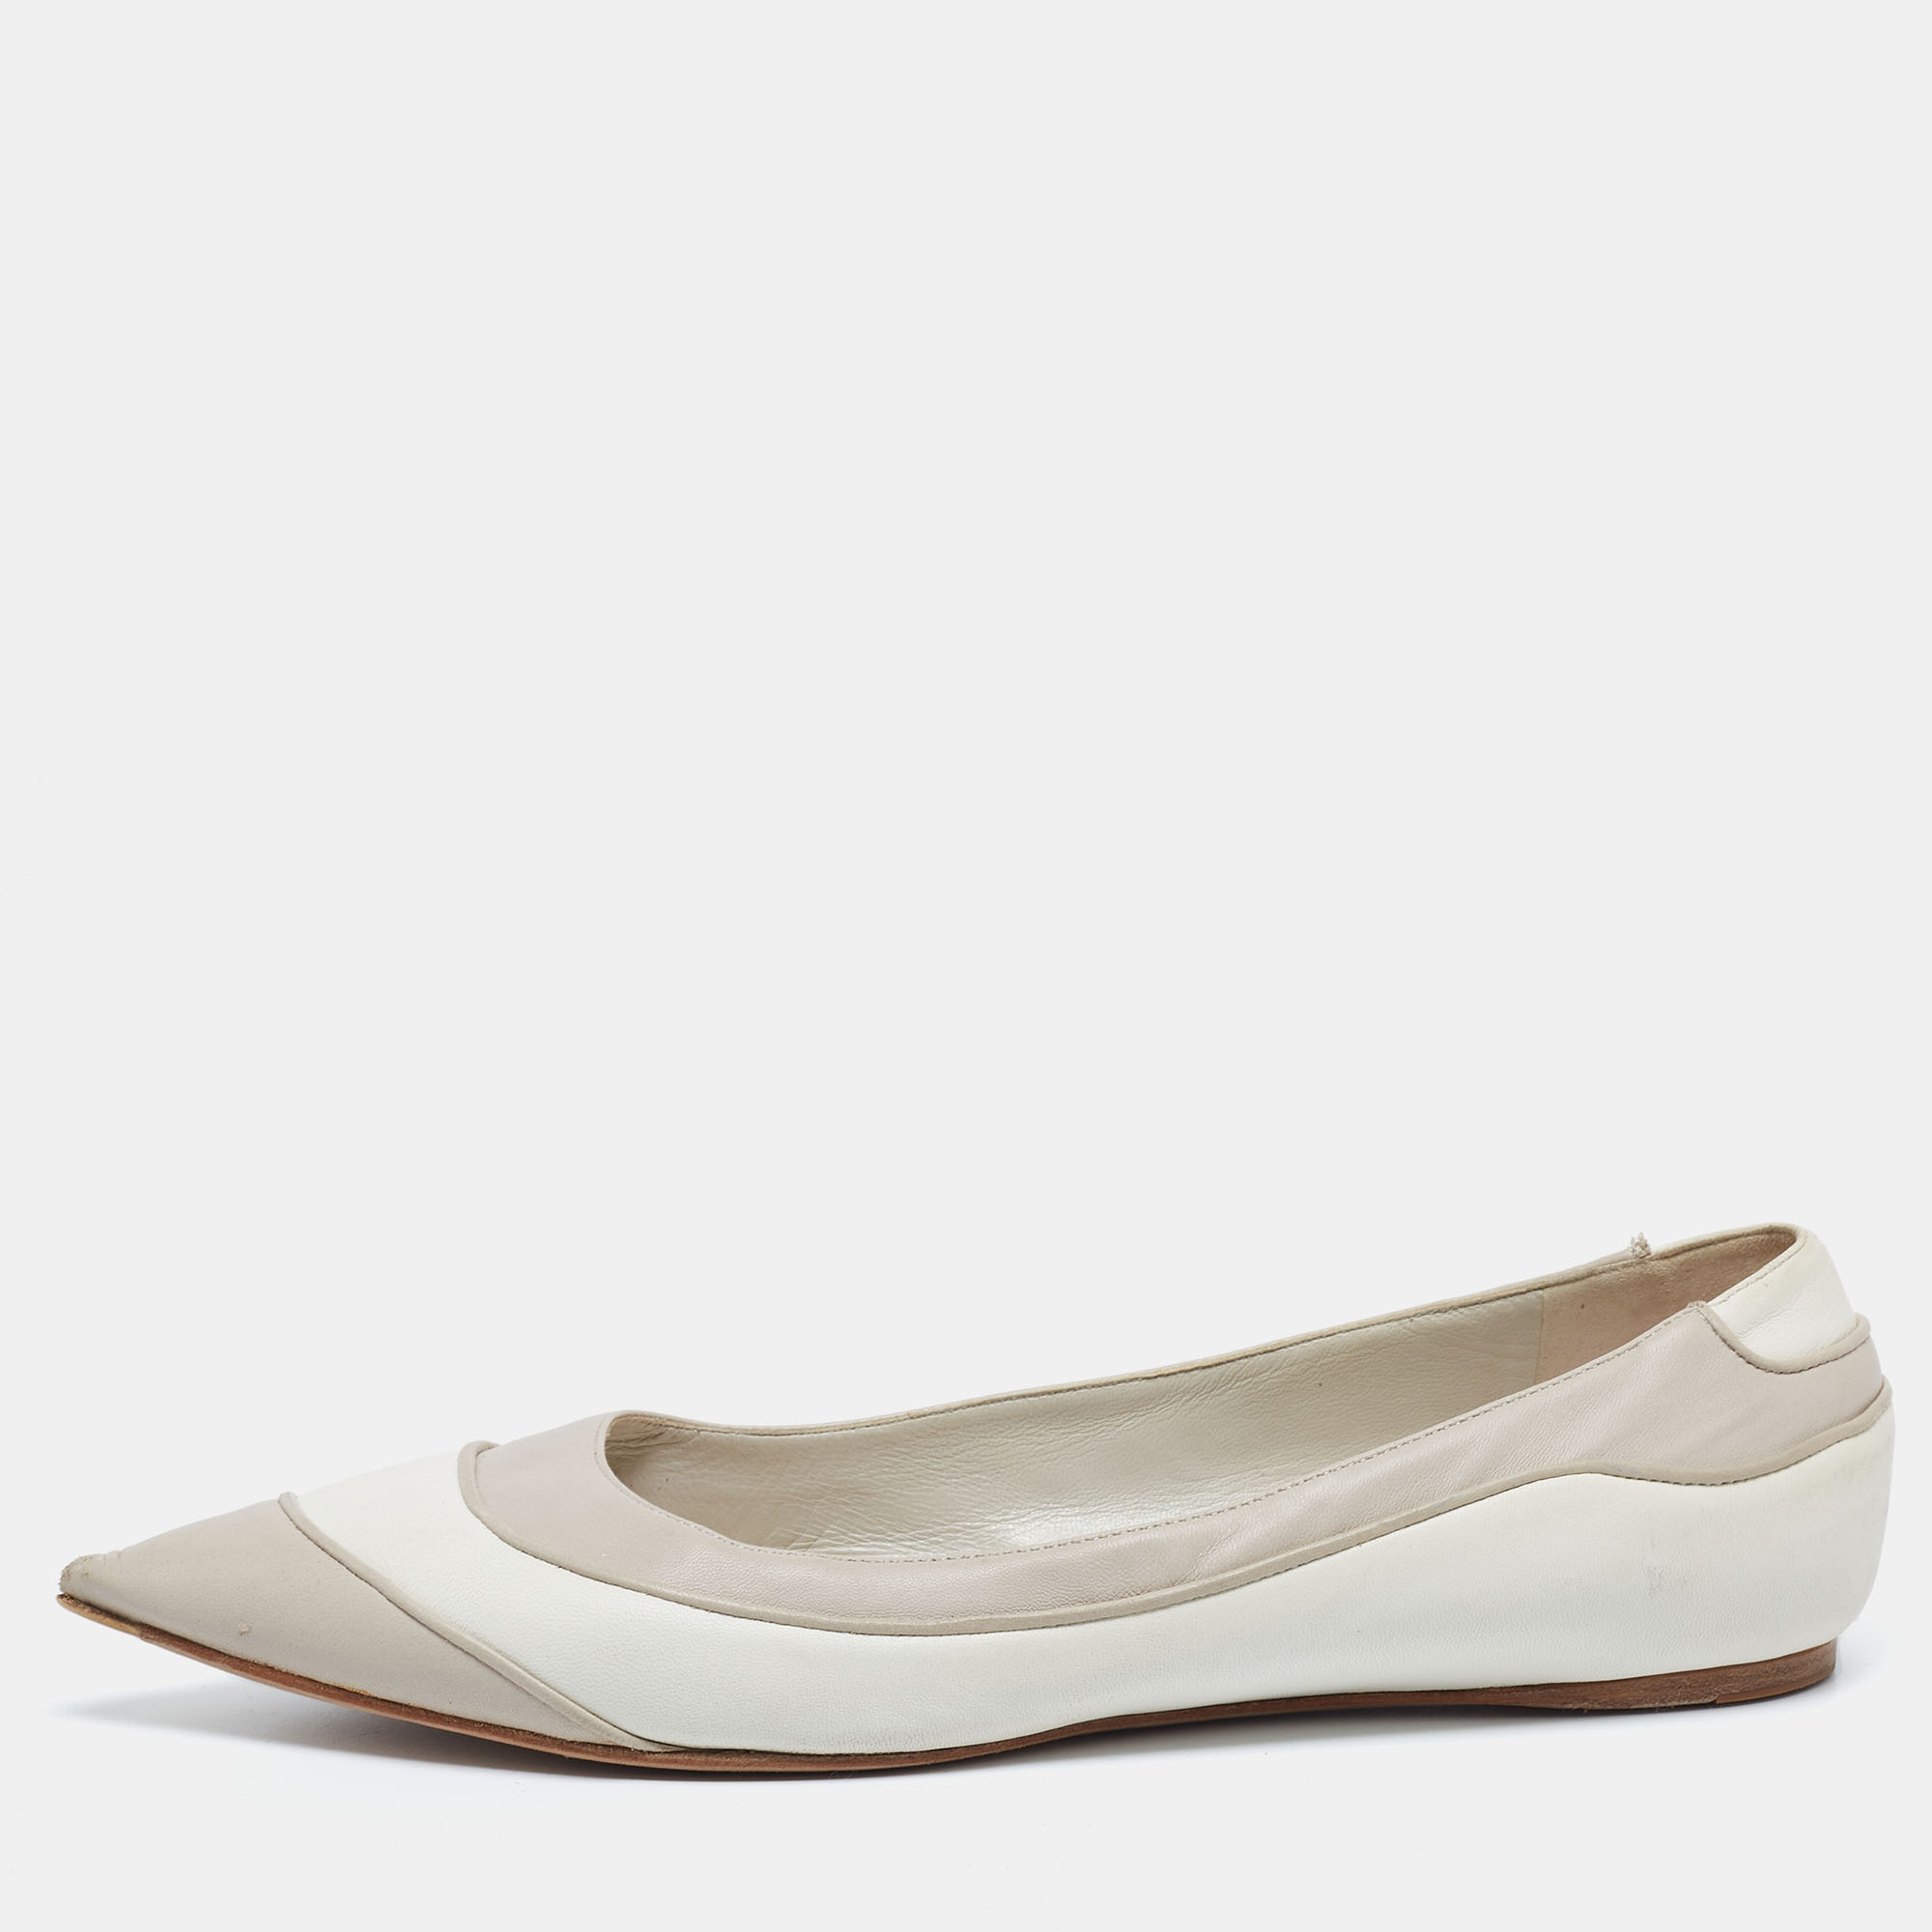 

Dior Off-White/Light Grey Leather Pointed Toe Ballet Flats Size